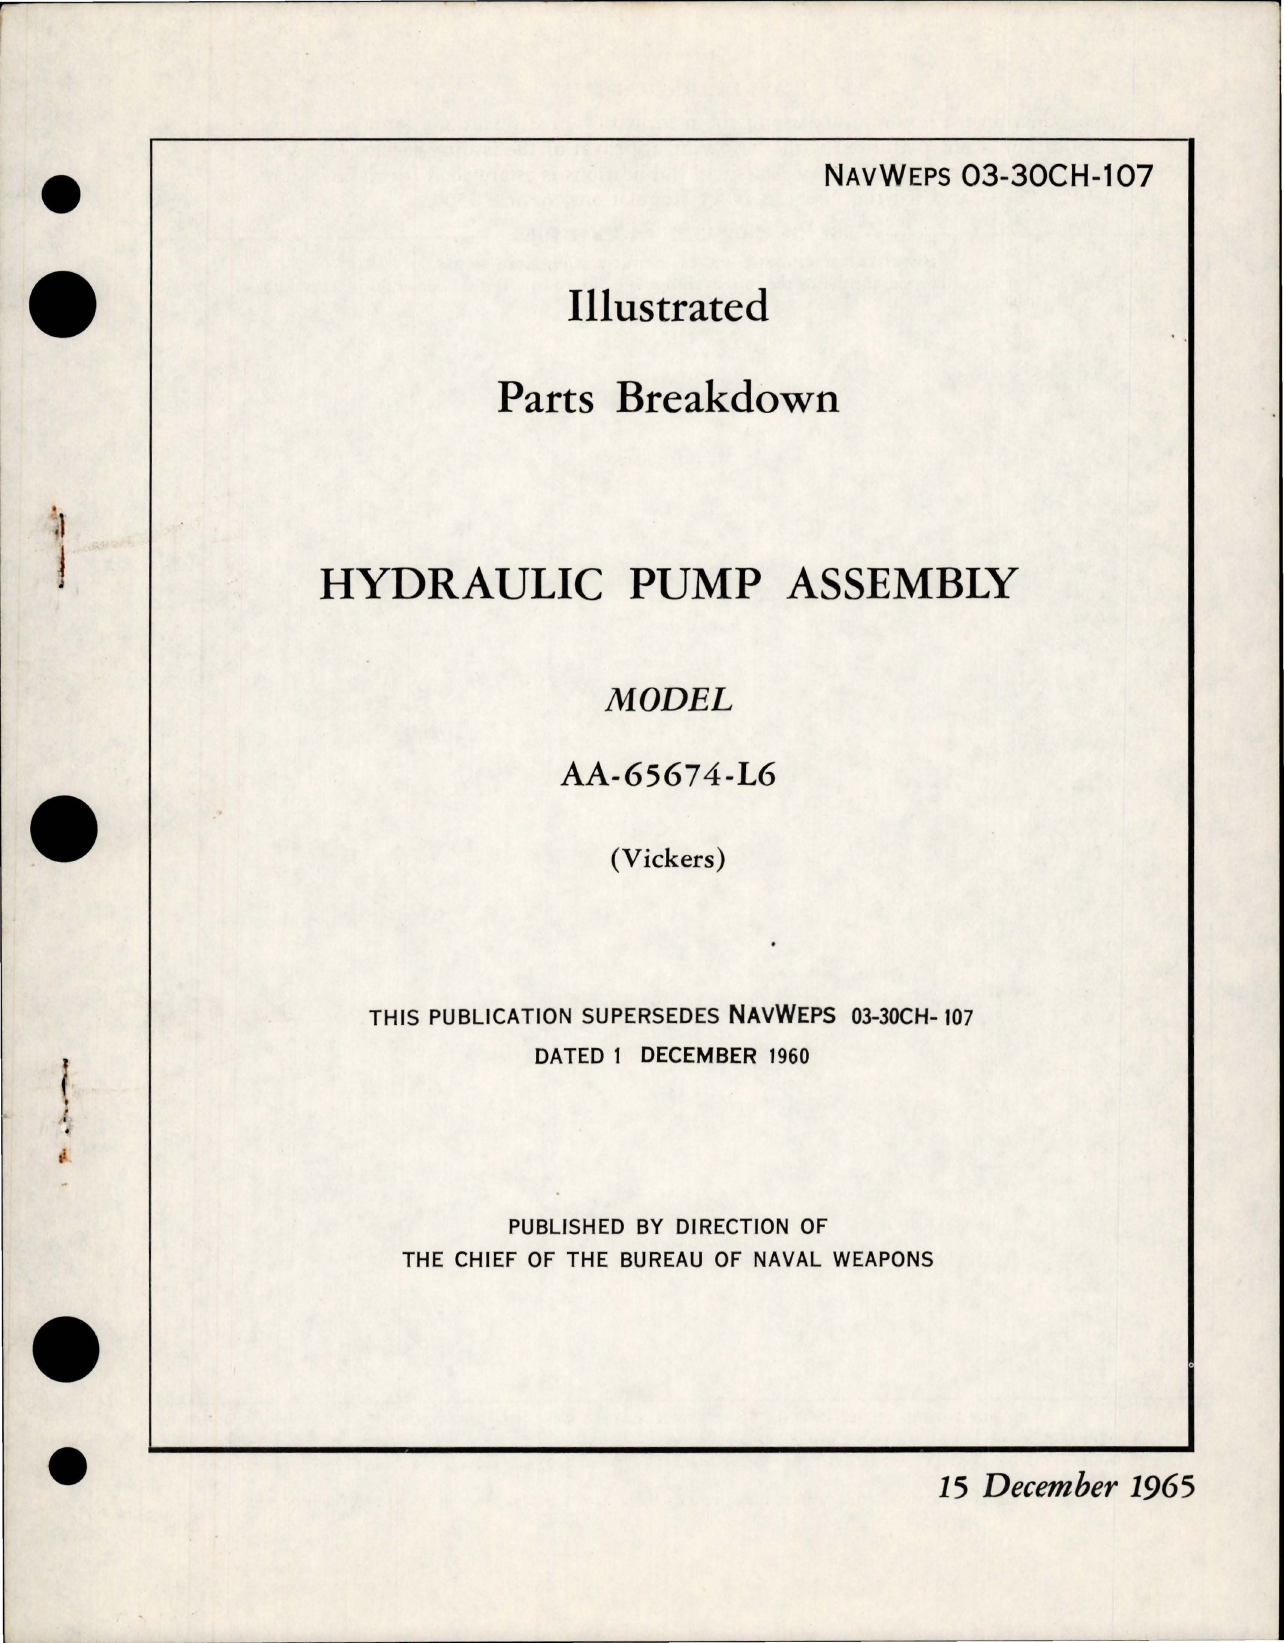 Sample page 1 from AirCorps Library document: Illustrated Parts Breakdown for Hydraulic Pump Assembly - Model AA-65674-L6 